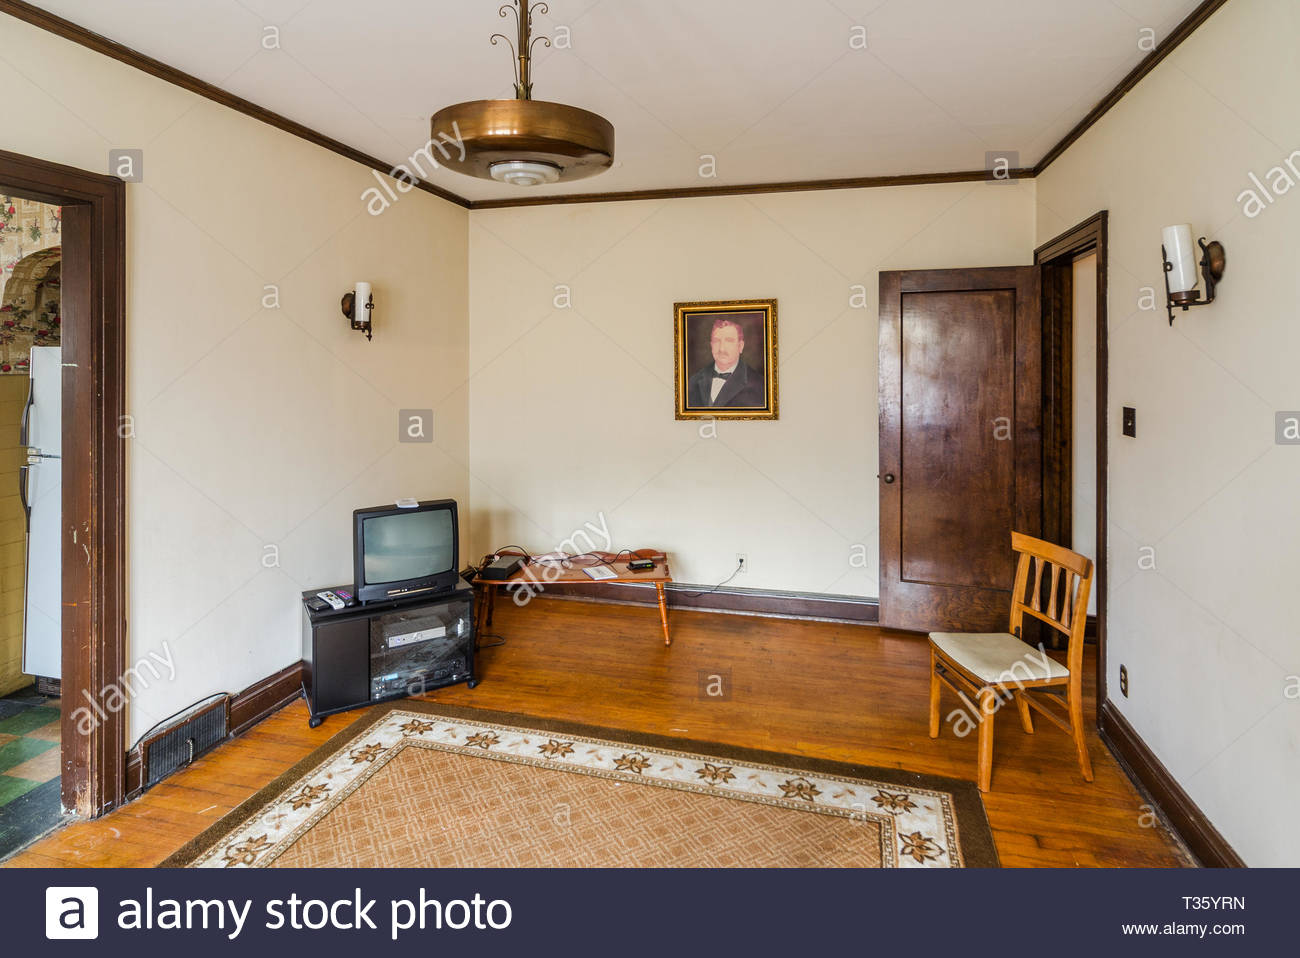 Interior Of Grein Funeral Home Stock Photo 242920713 Alamy